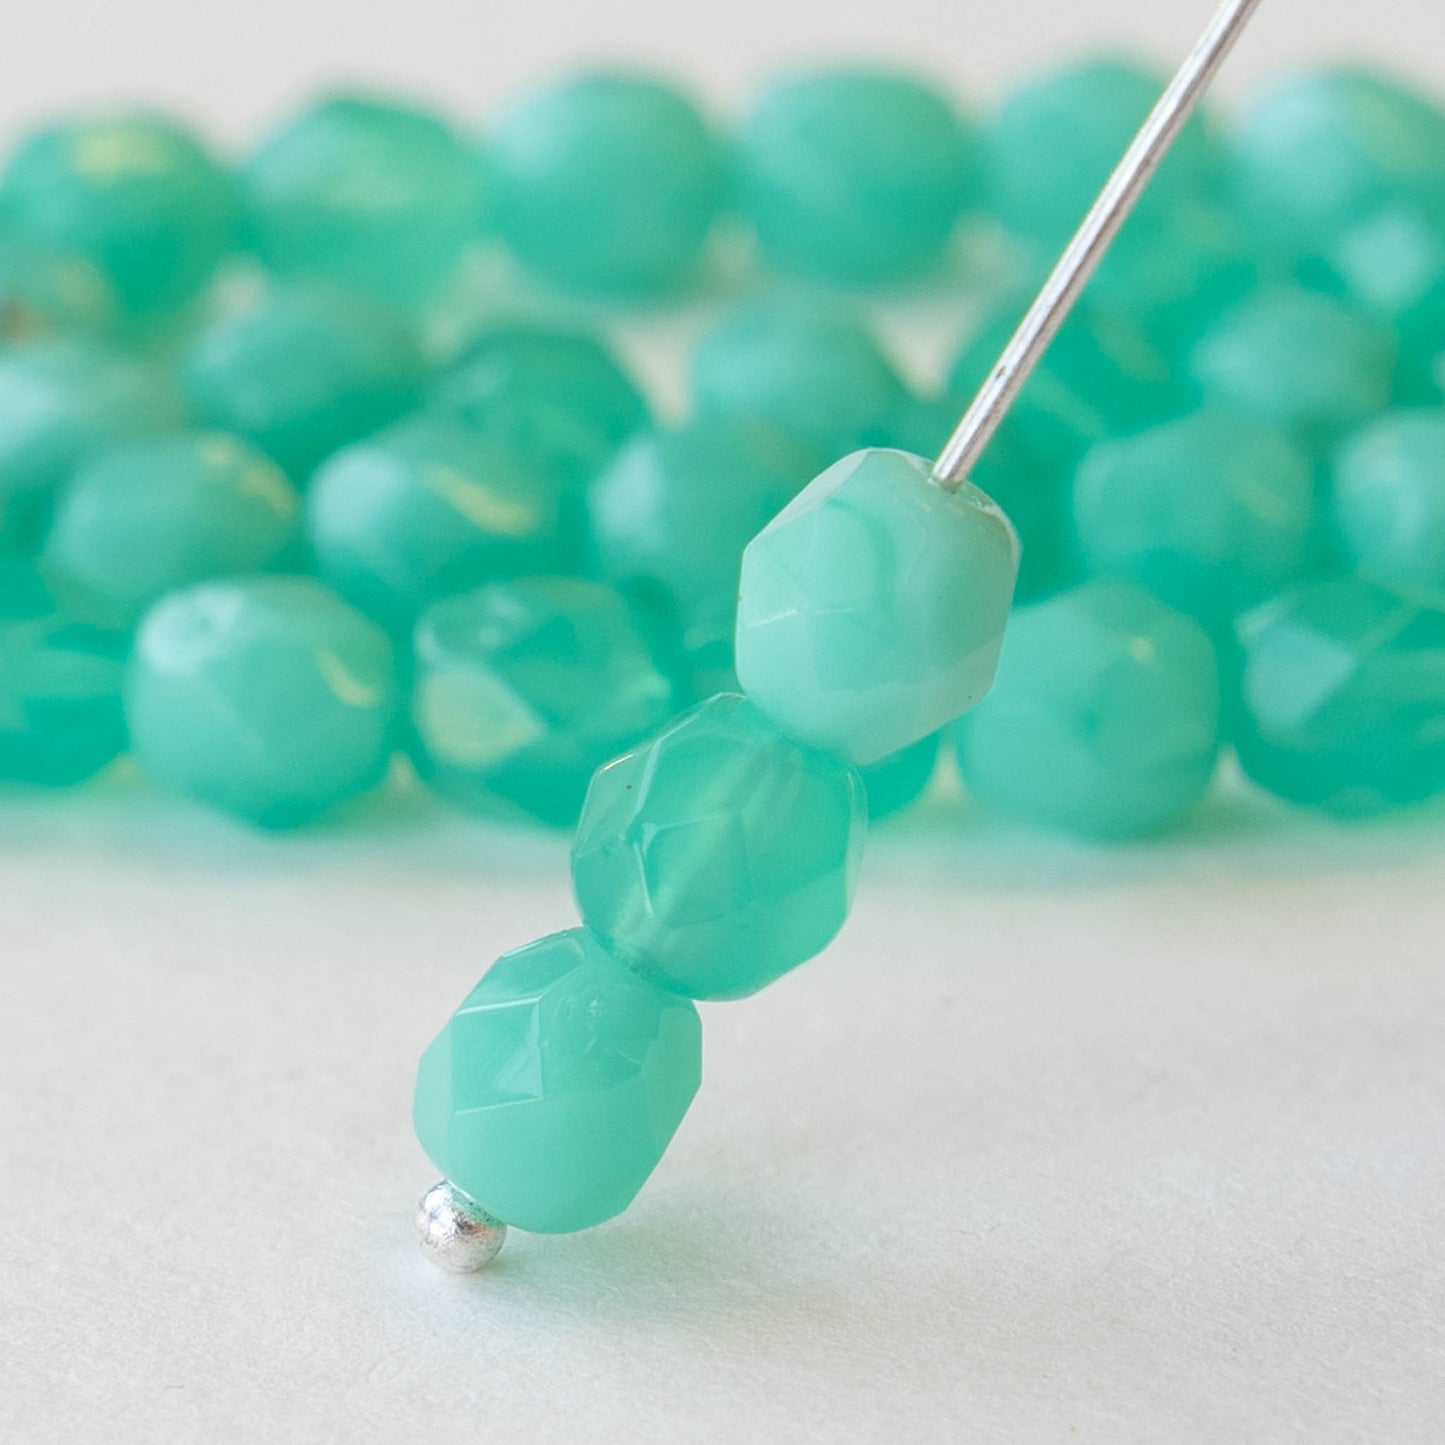 Load image into Gallery viewer, 6mm Round Firepolished Beads - Seafoam Opaline - 25 beads
